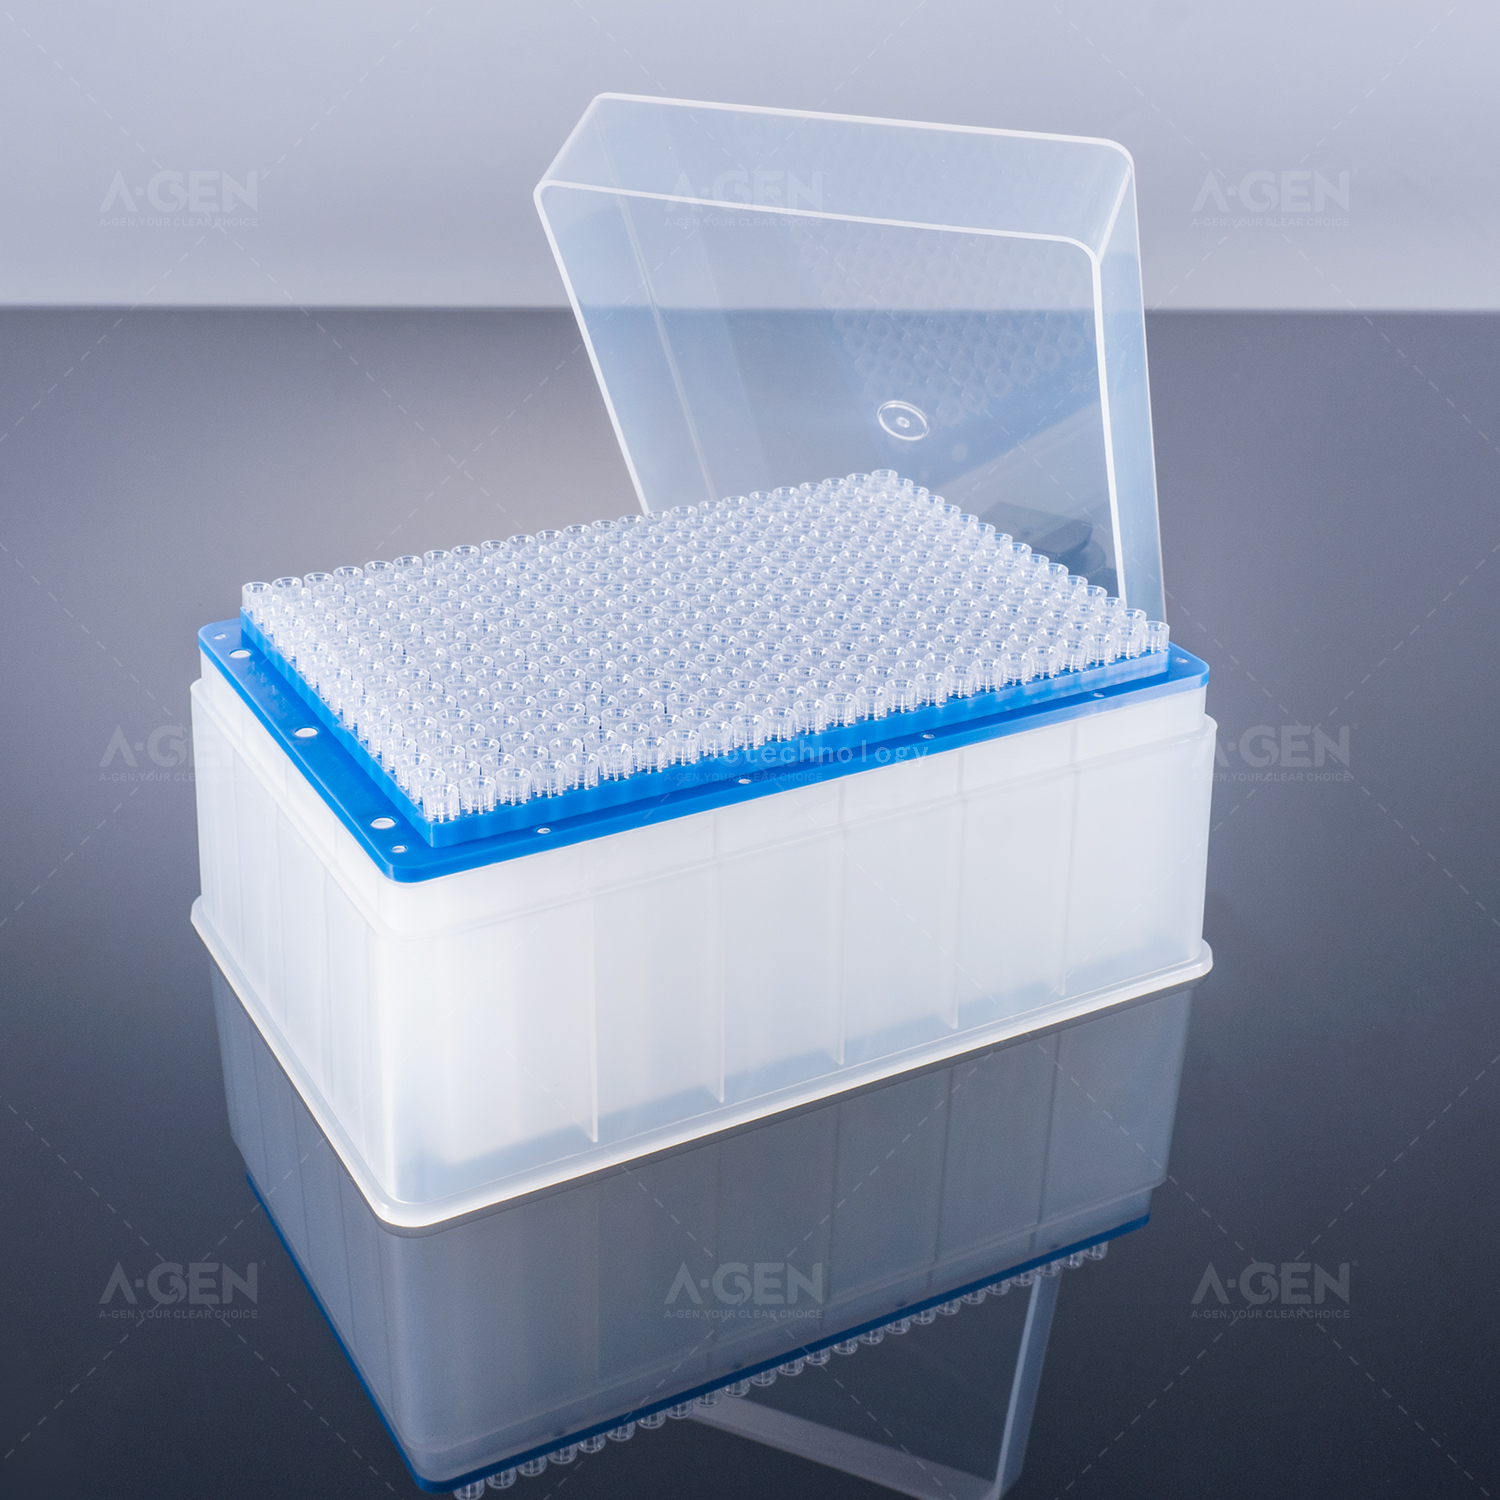 Agilent 30μL Transparent Pipette Tip (Racked,sterilized) for Liquid Transfer VT-F384-30-RSL Low Residual with Filter